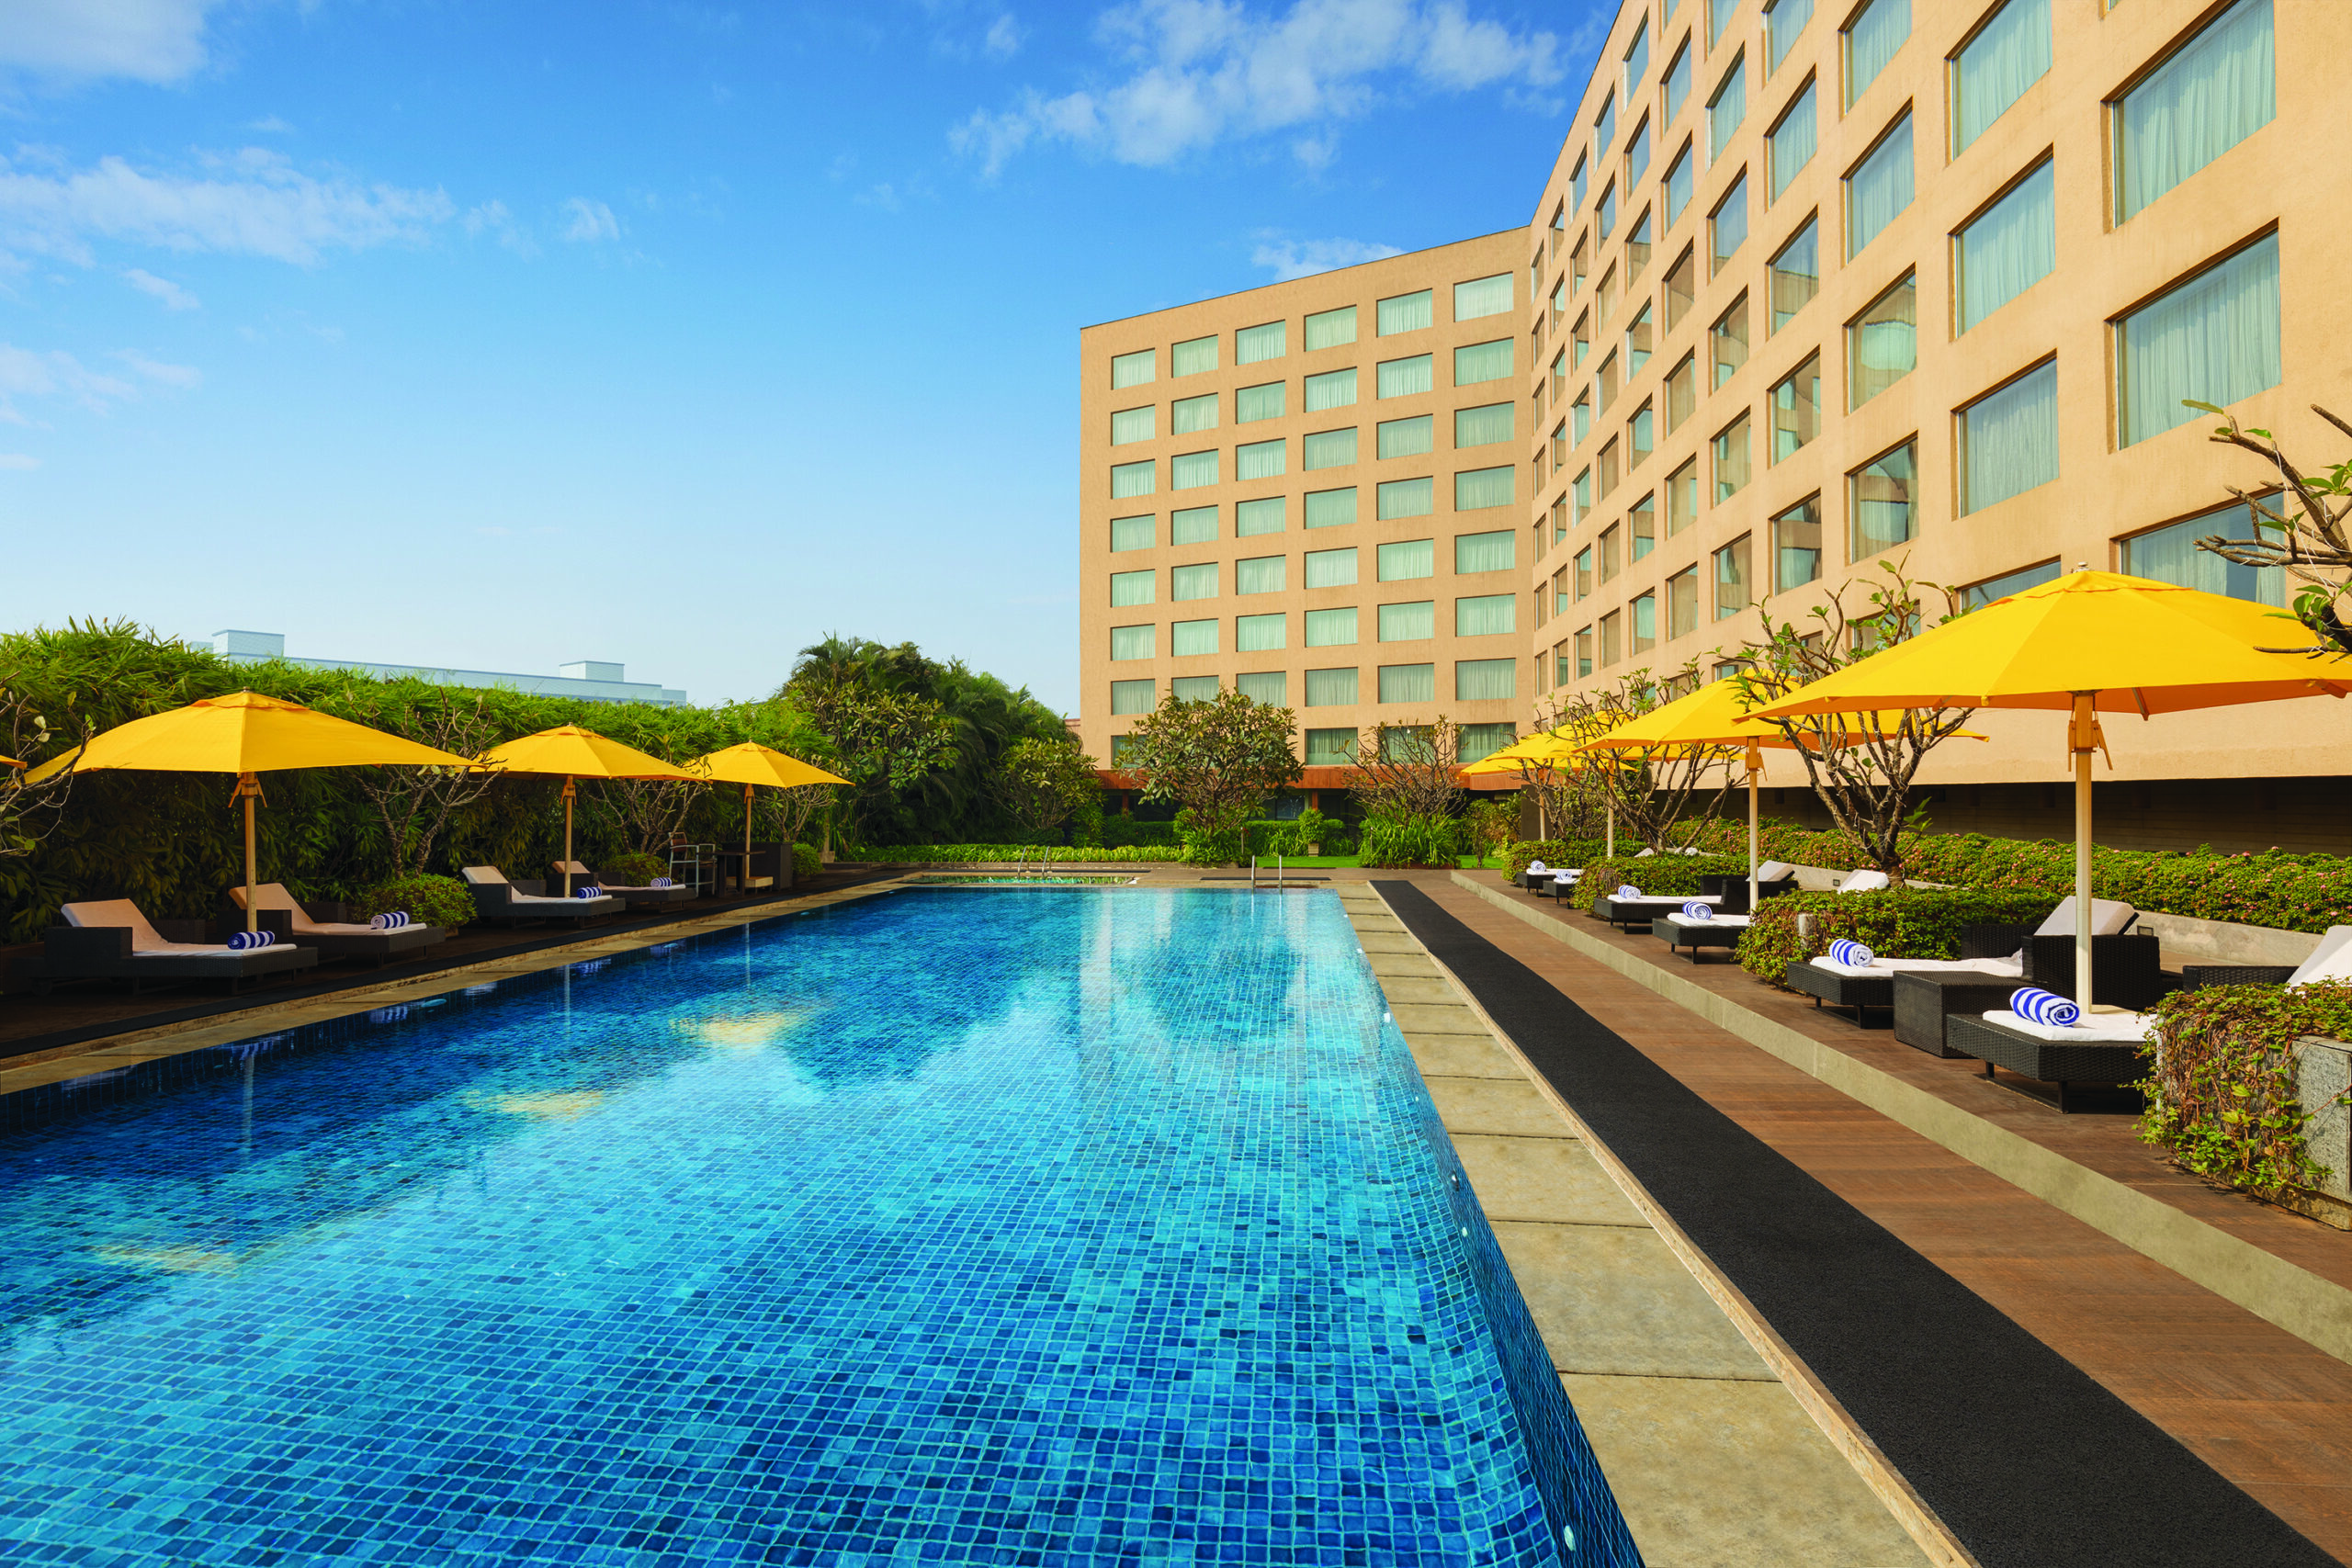 Courtyard By Marriott Mumbai International Airport: Confident of strong growth this year